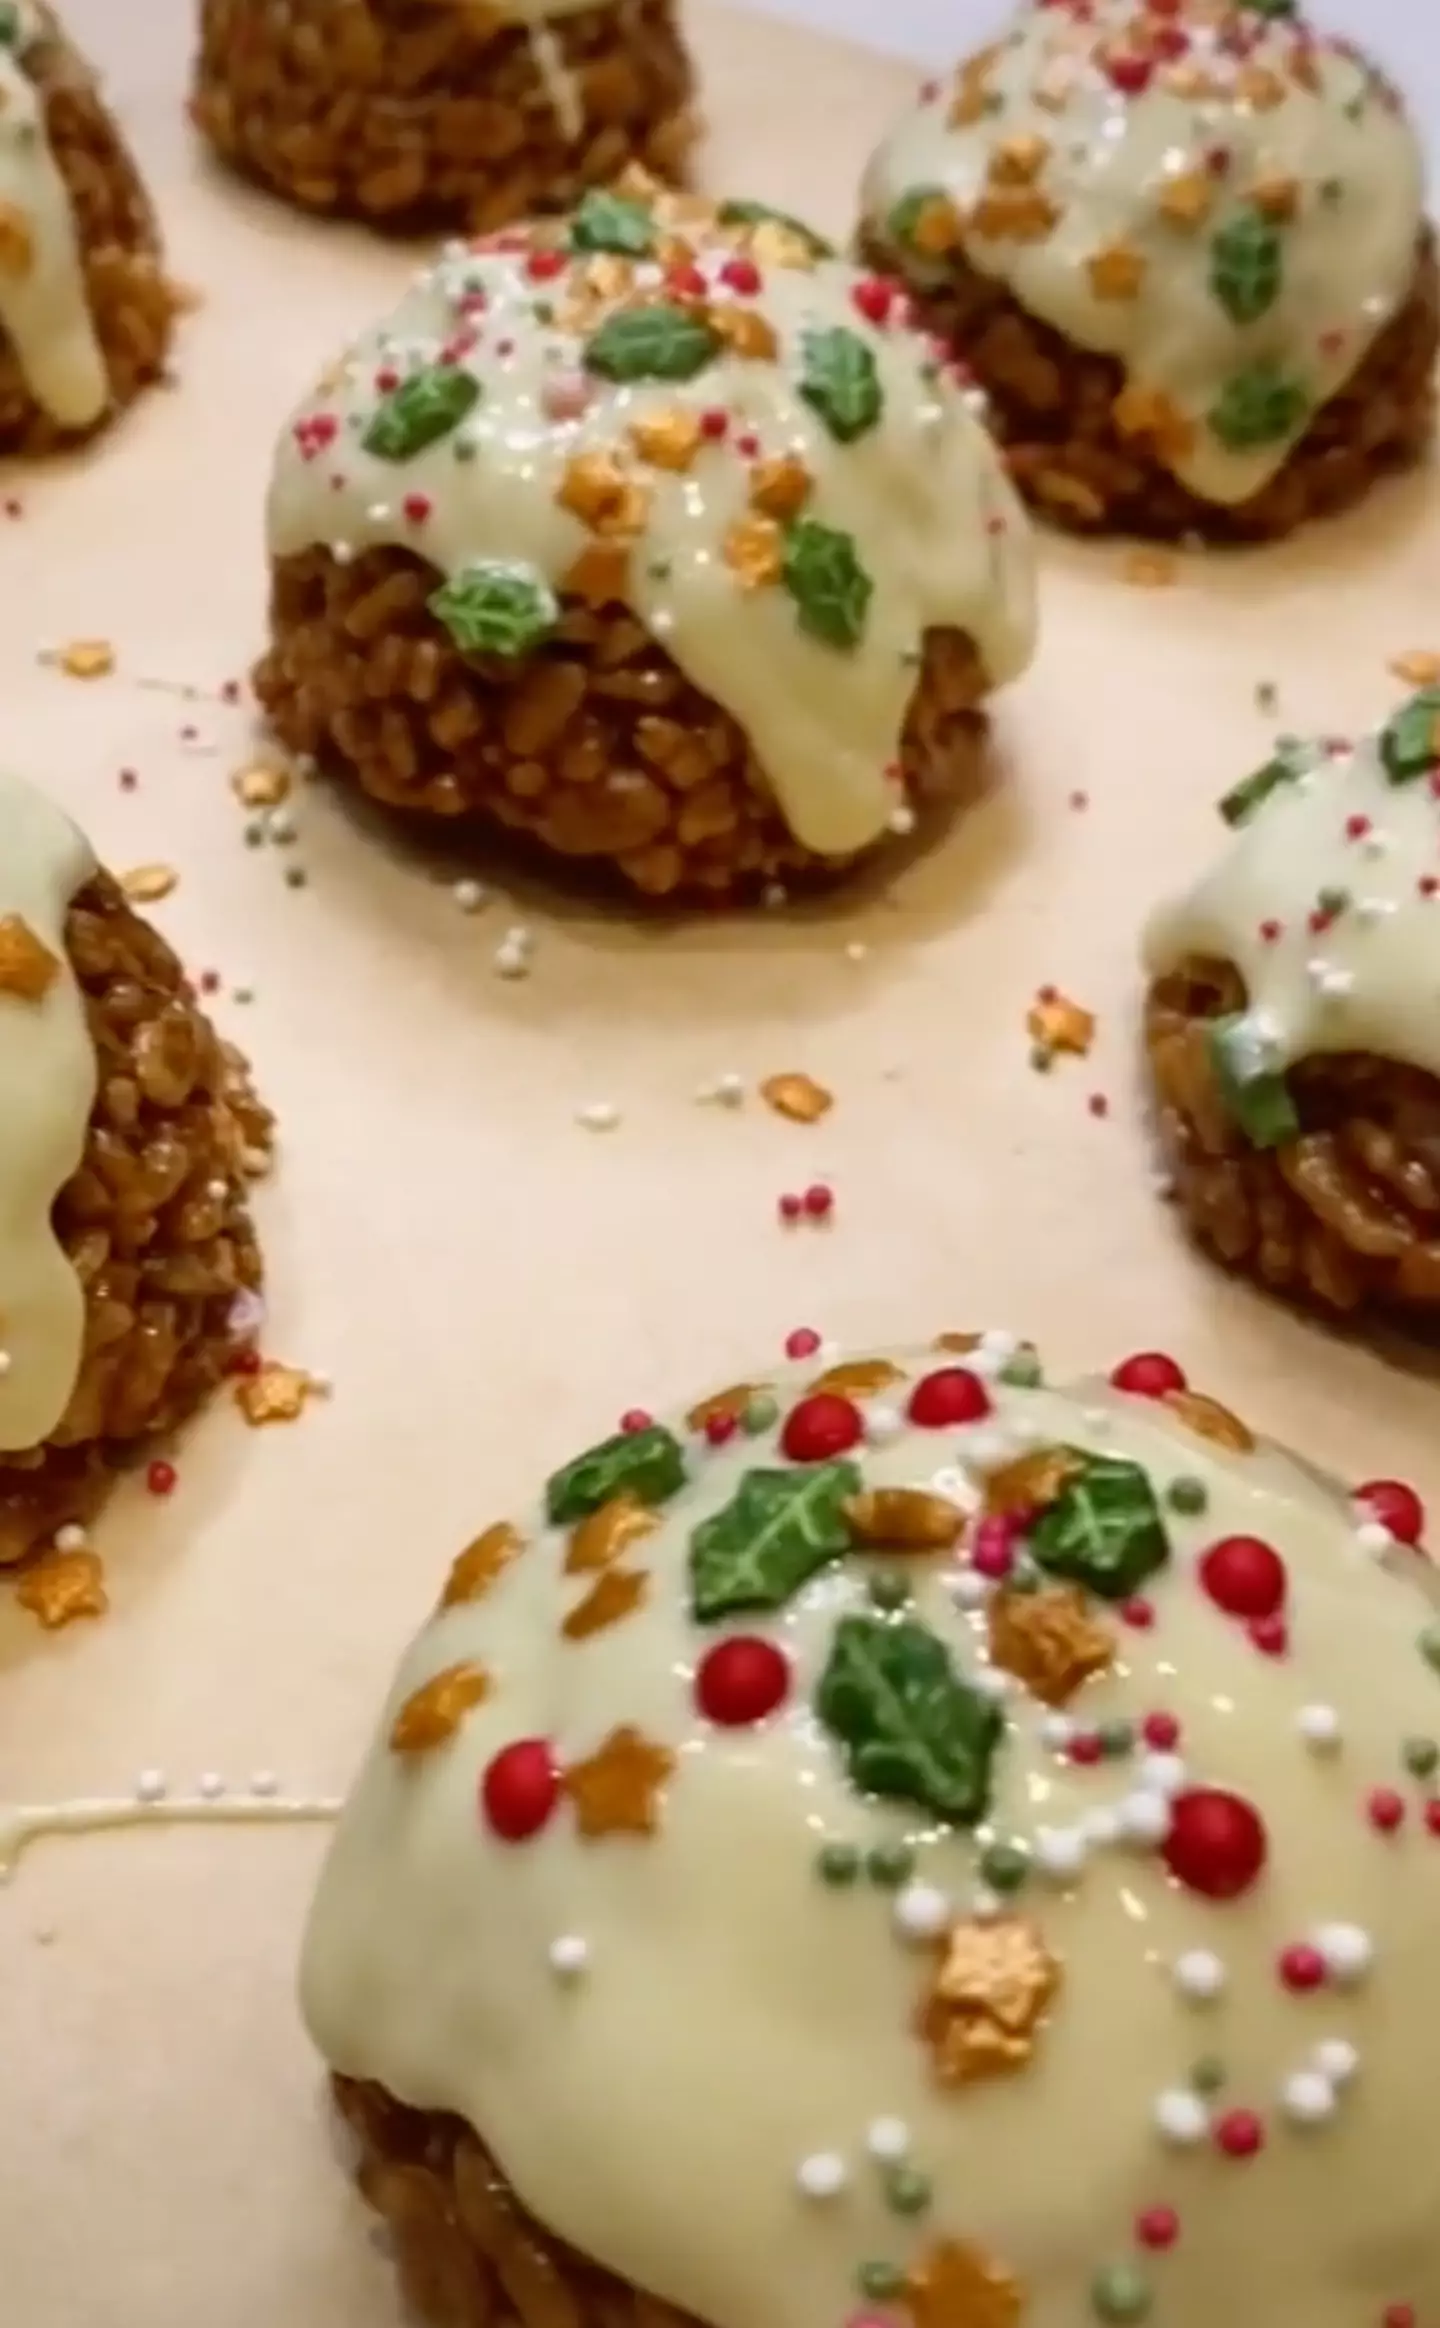 These rice krispy puddings look delish (